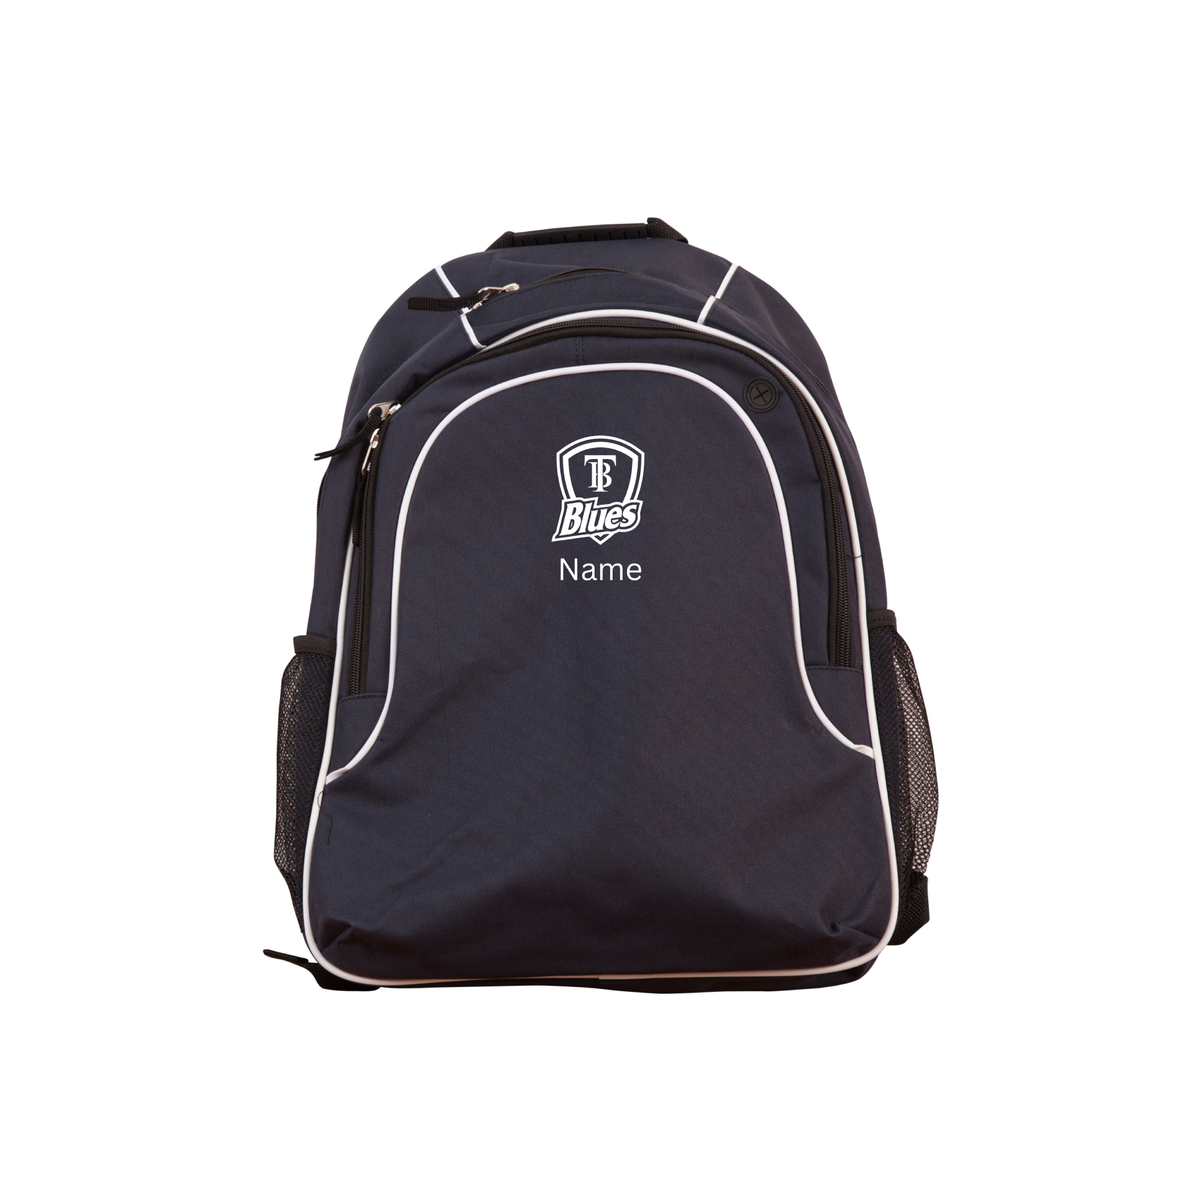 Tumby Bay Blues Winning Spirit Travel Navy Backpack Embroidered Logo + Personalised Embroidered Name